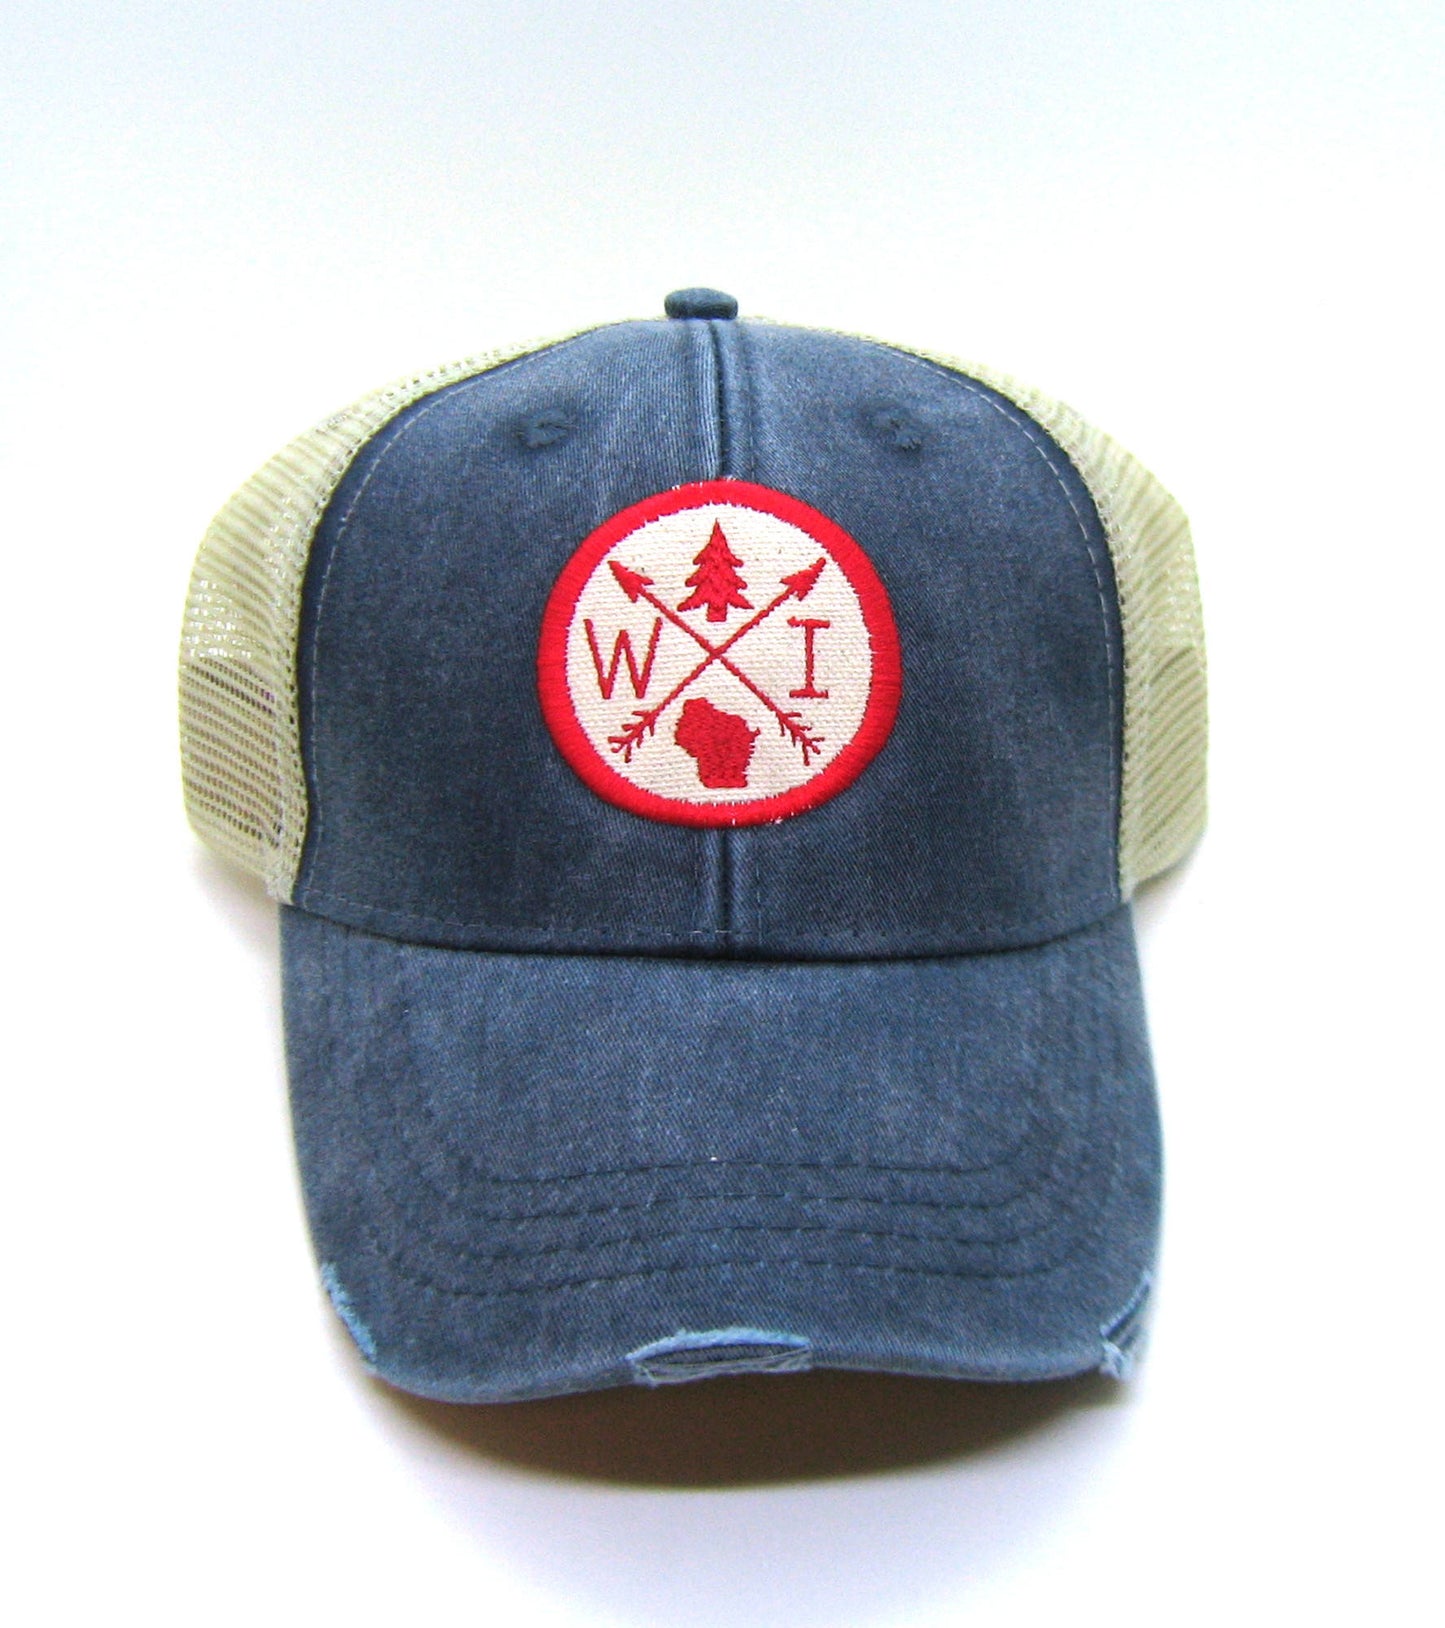 Wisconsin Hat - Navy Blue Distressed Snapback Trucker Hat - Wisconsin Patched Arrow Compass